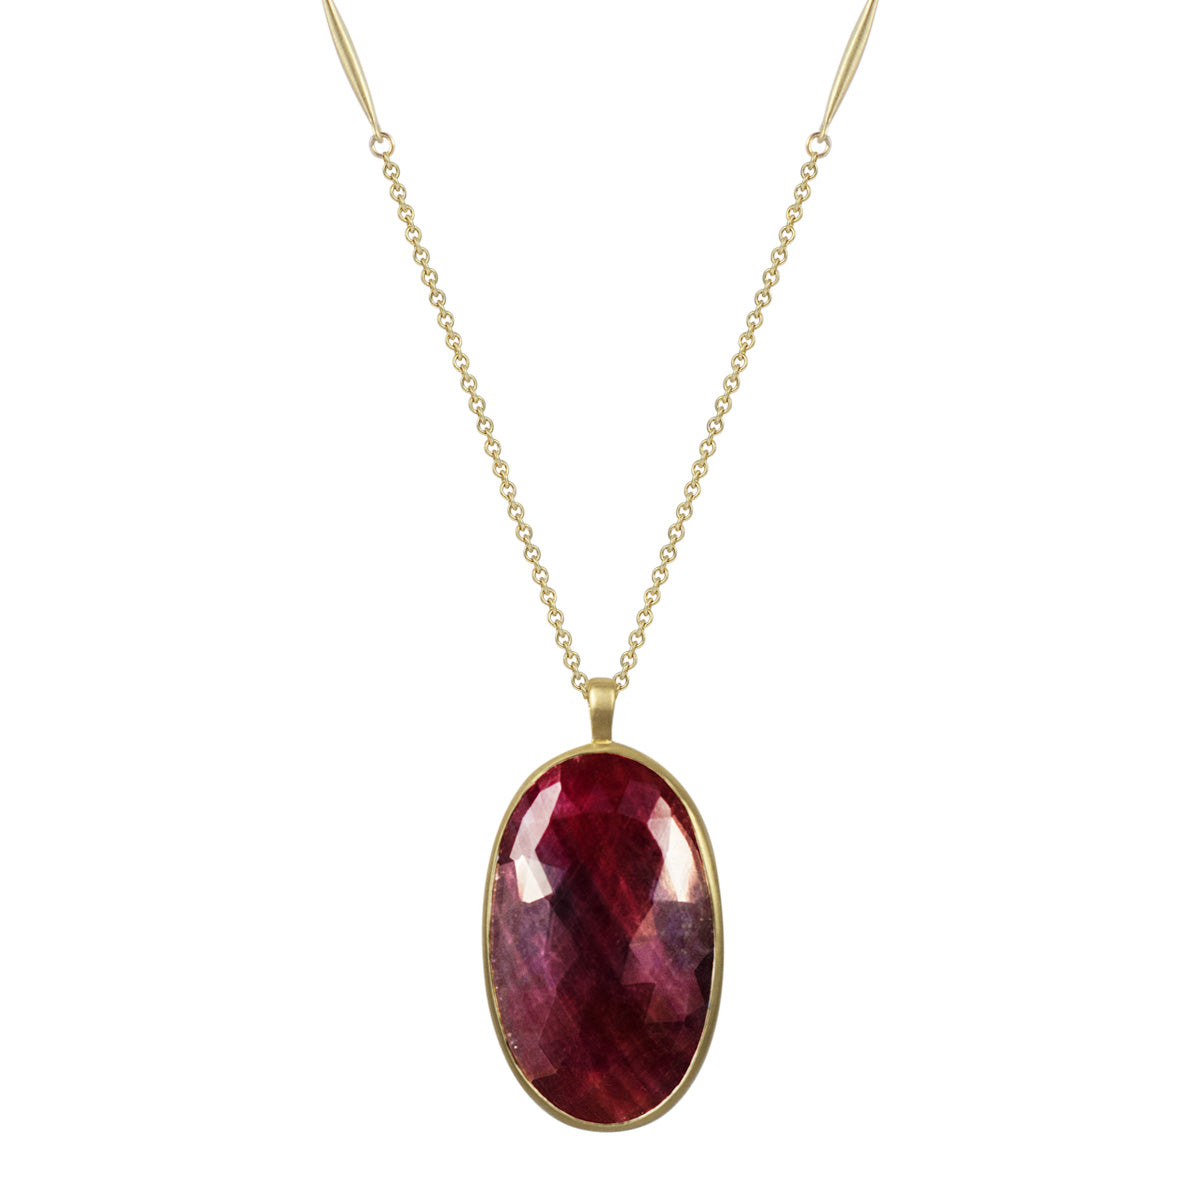 18K Gold 37.6 Carat Large Oval Ruby Pendant on Lure Chain